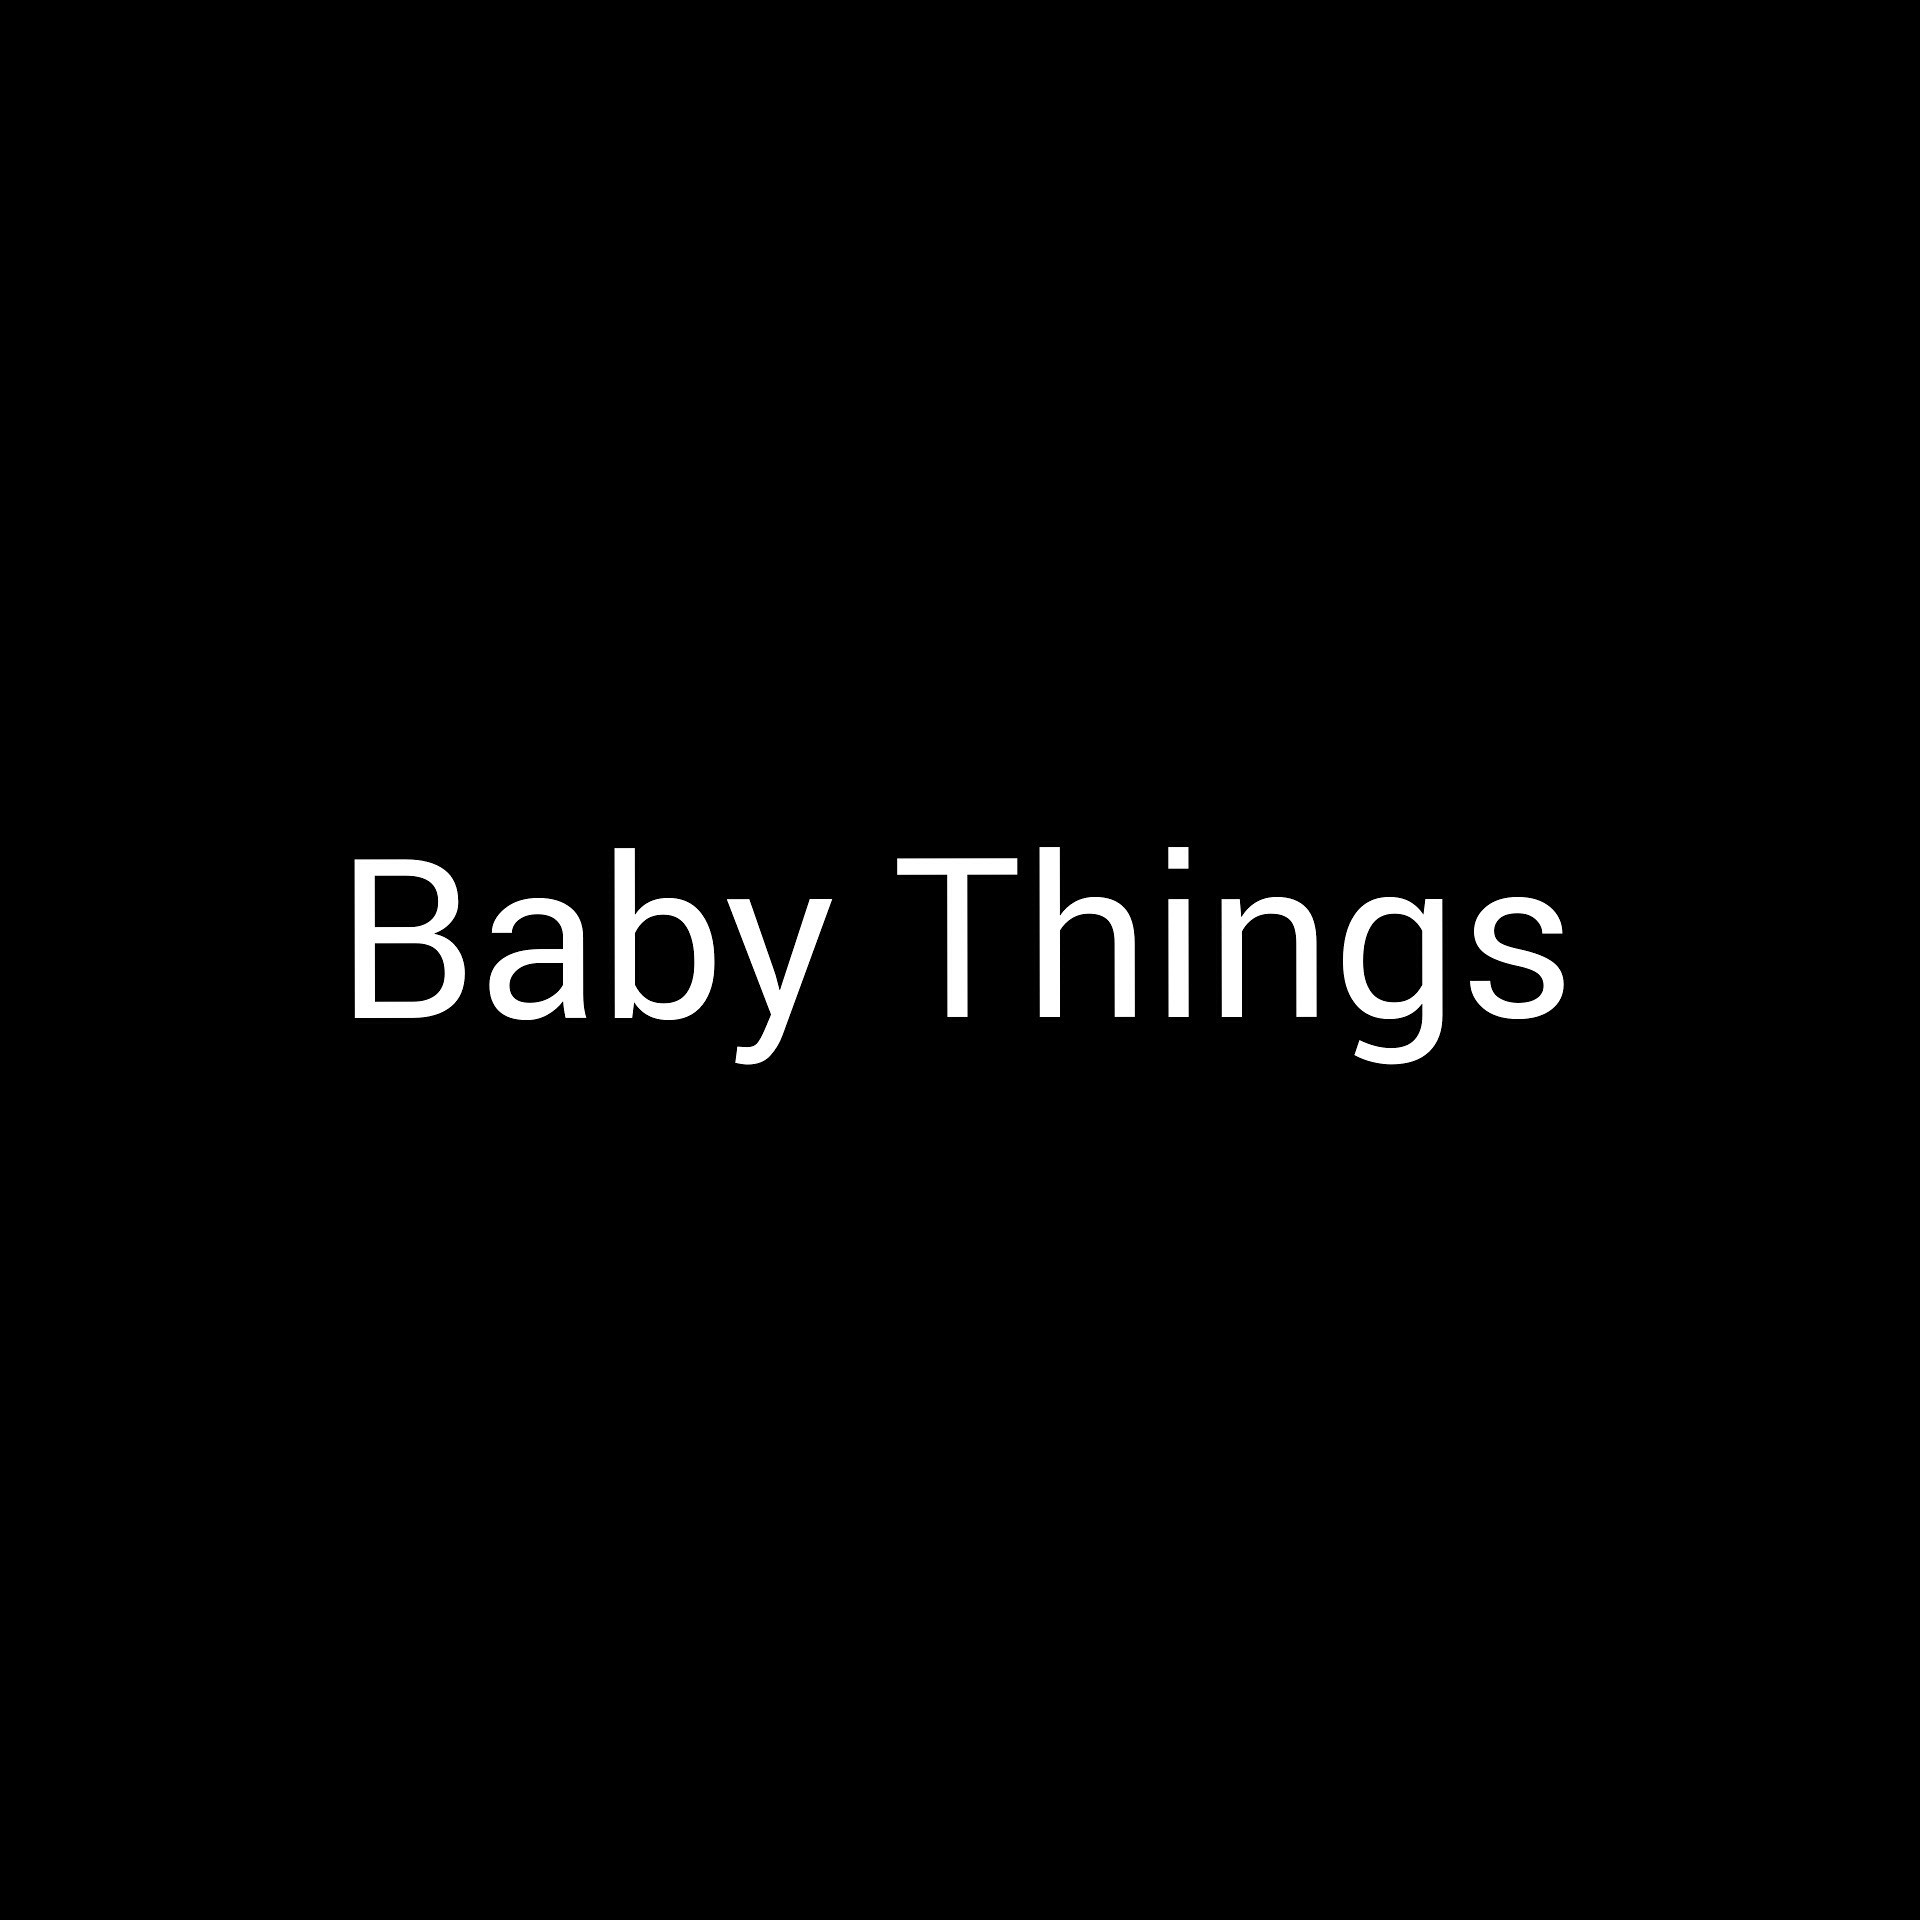 Phoenix James’ Baby Things – Film [pre-production]